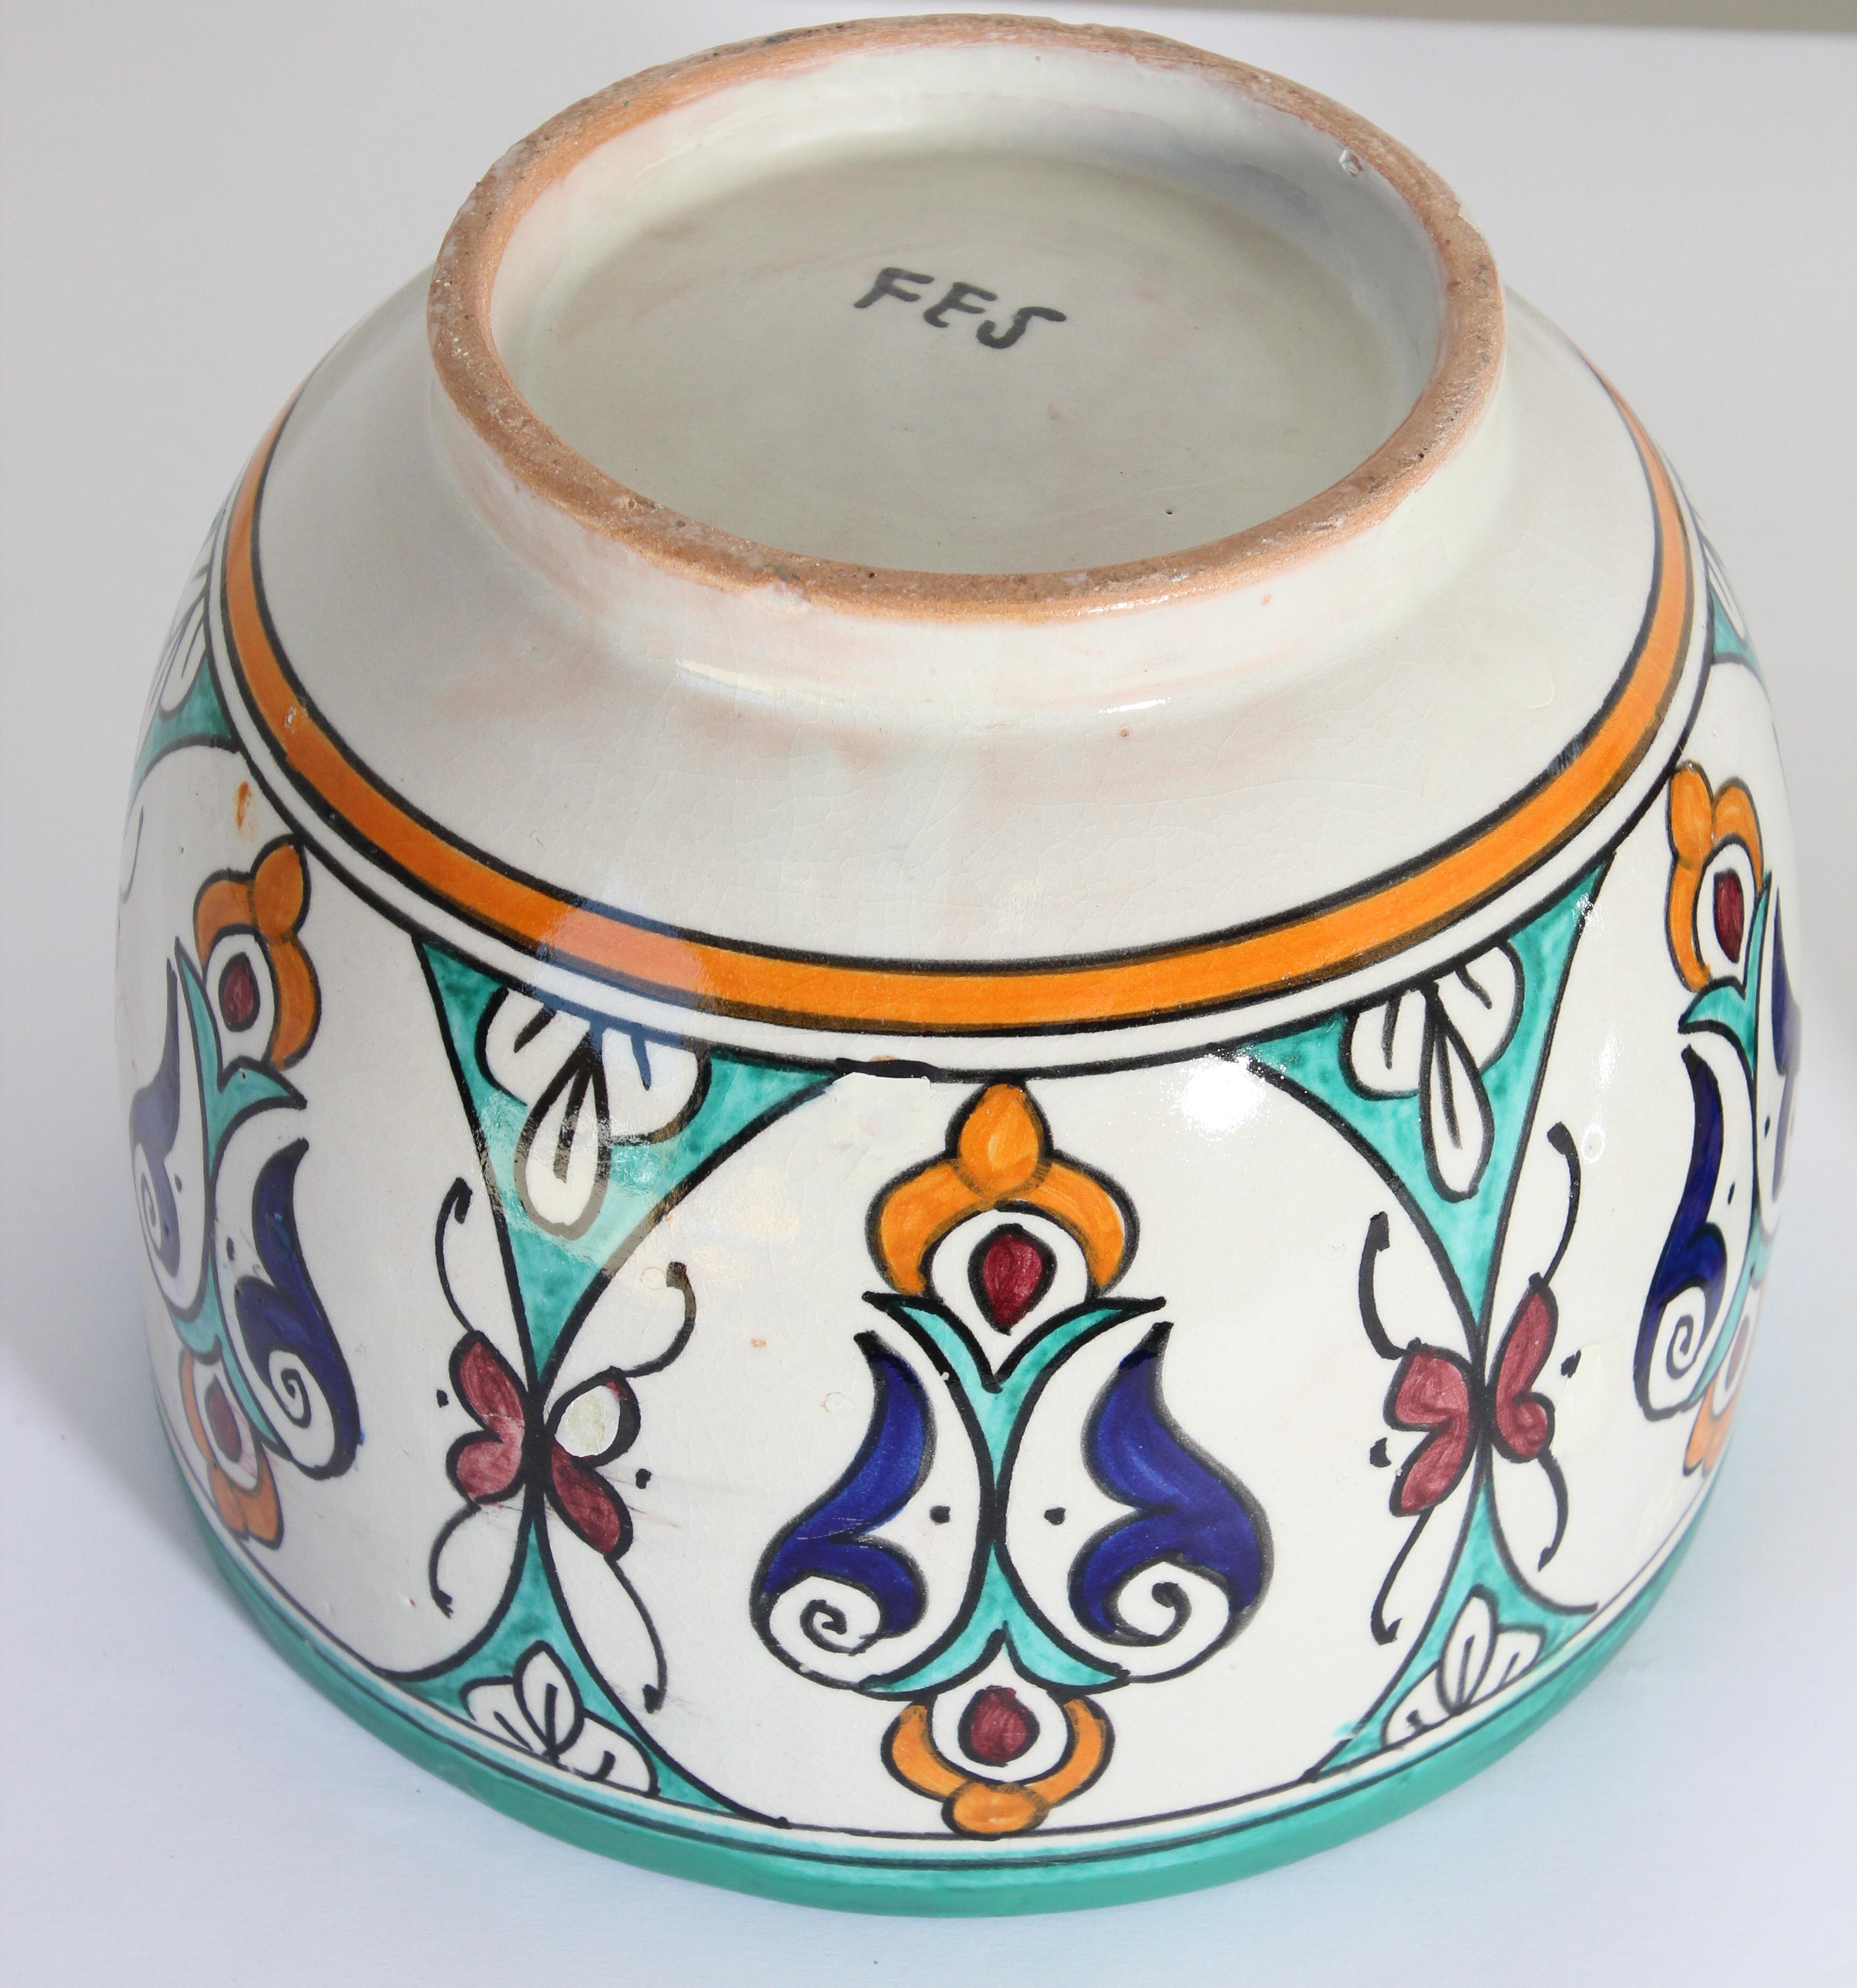 Glazed Moorish Ceramic Covered Jar Handcrafted in Fez Morocco For Sale 4